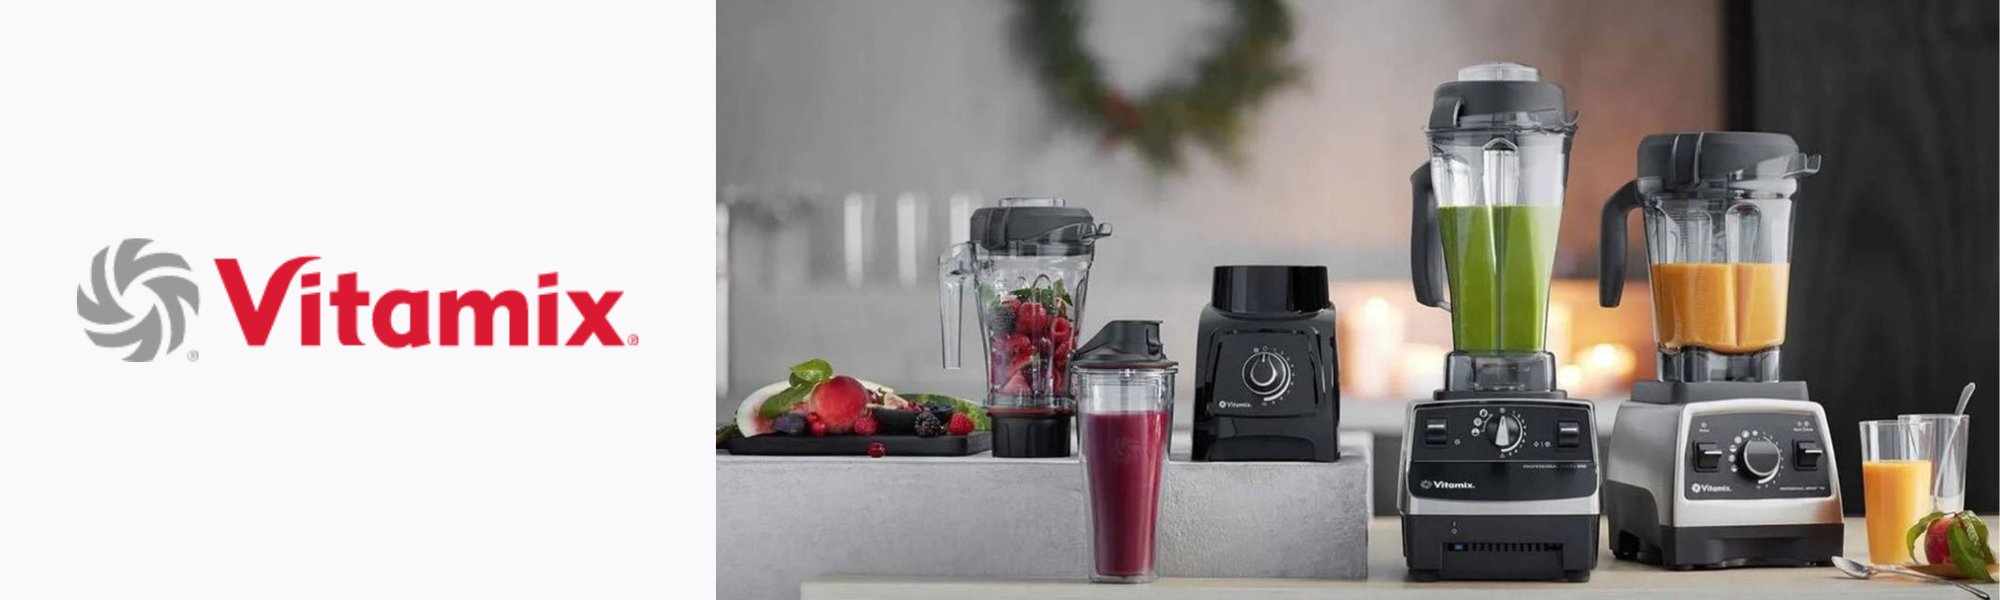 Vitamix Mothers Day Promotion - Free Gift with Purchase of Ascent or Explorian Blender